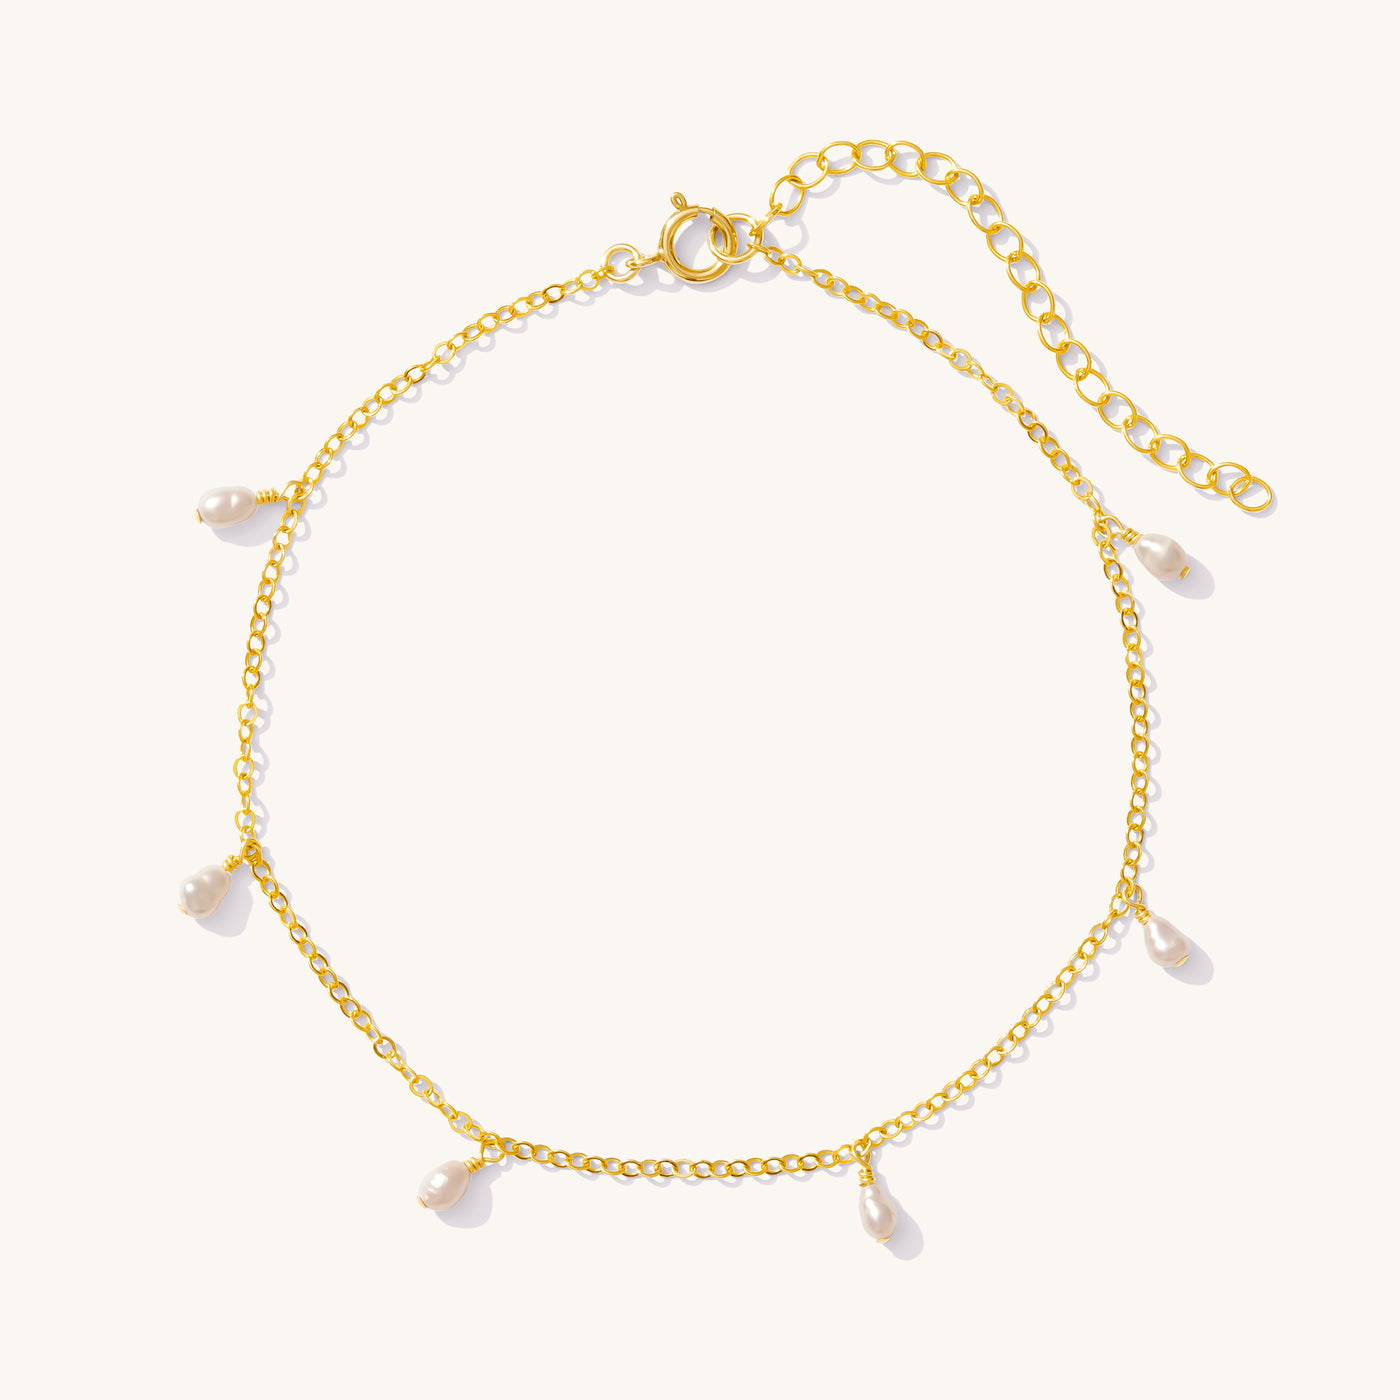 Dangling Pearl Anklet | Simple & Dainty Jewelry